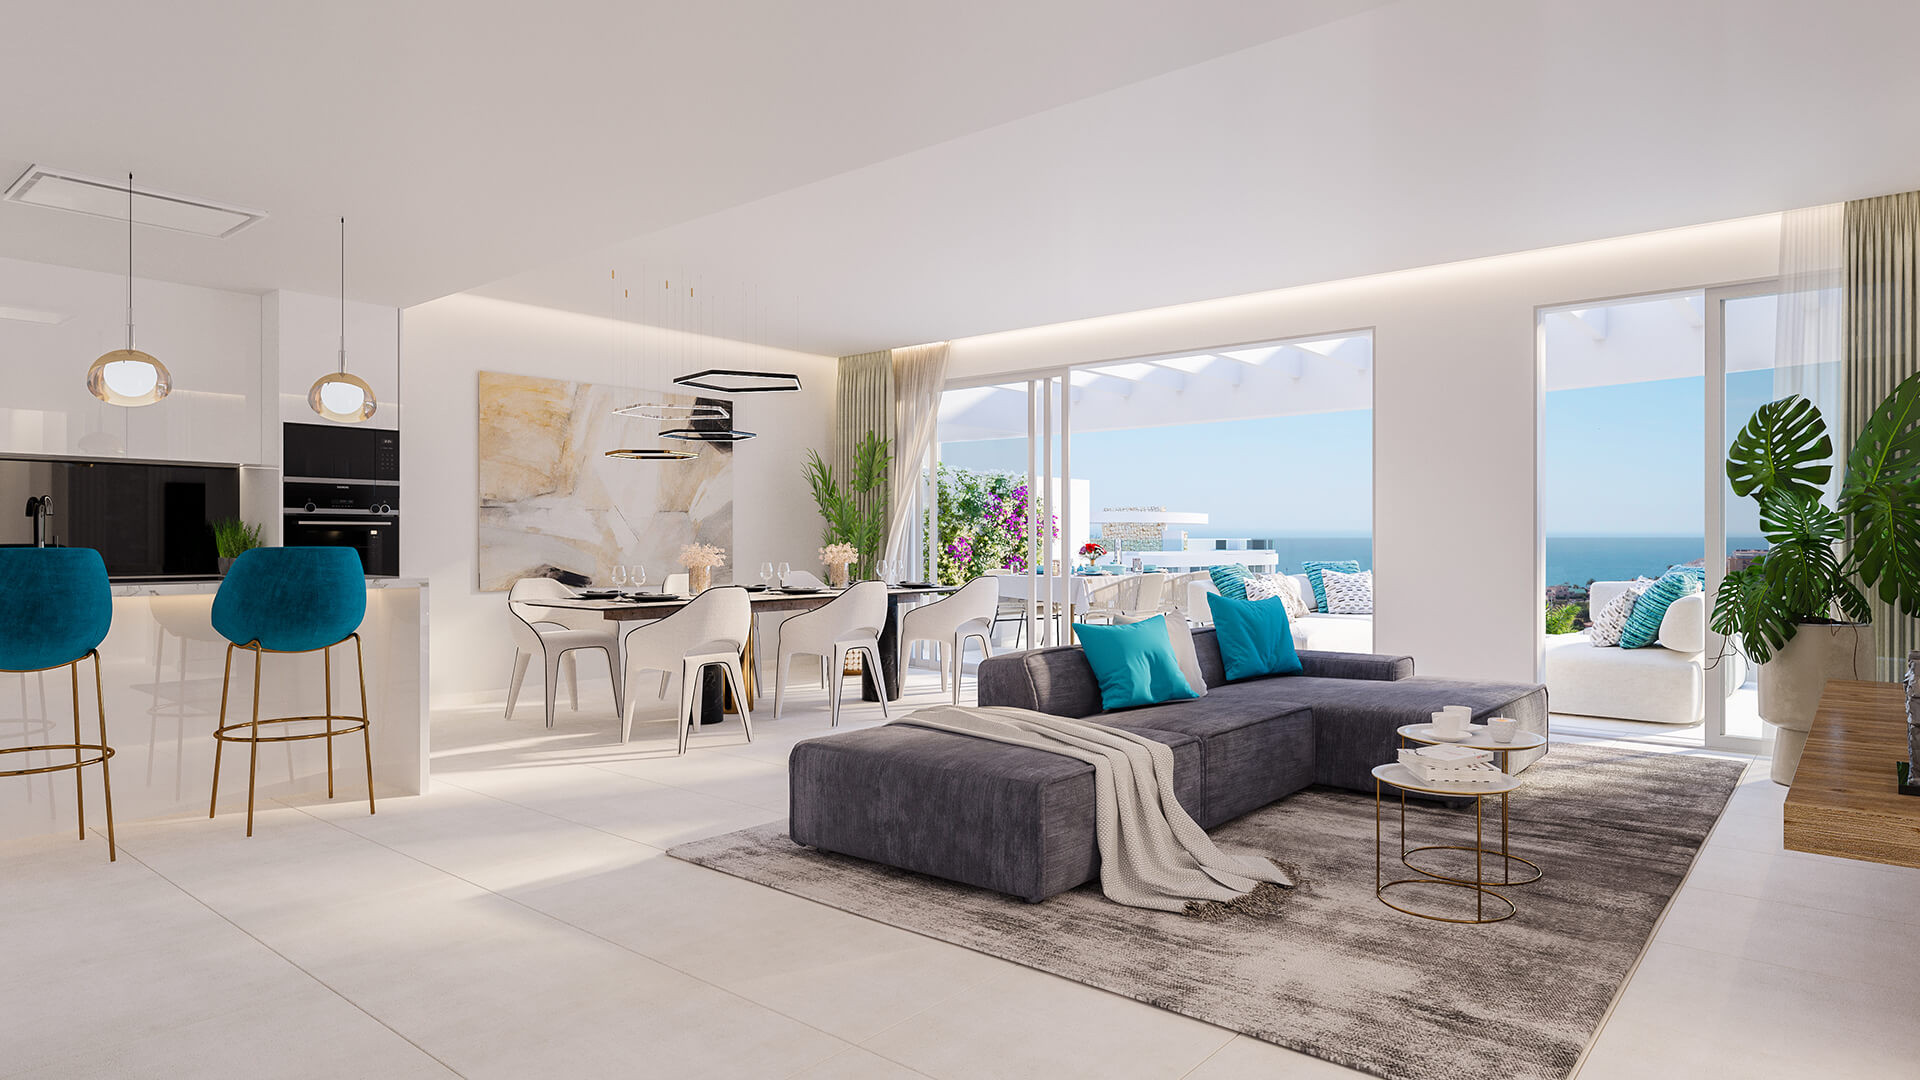 Royal Palms Mijas: New residential project of 69 homes with spectacular sea views in Mijas Costa. | Image 3